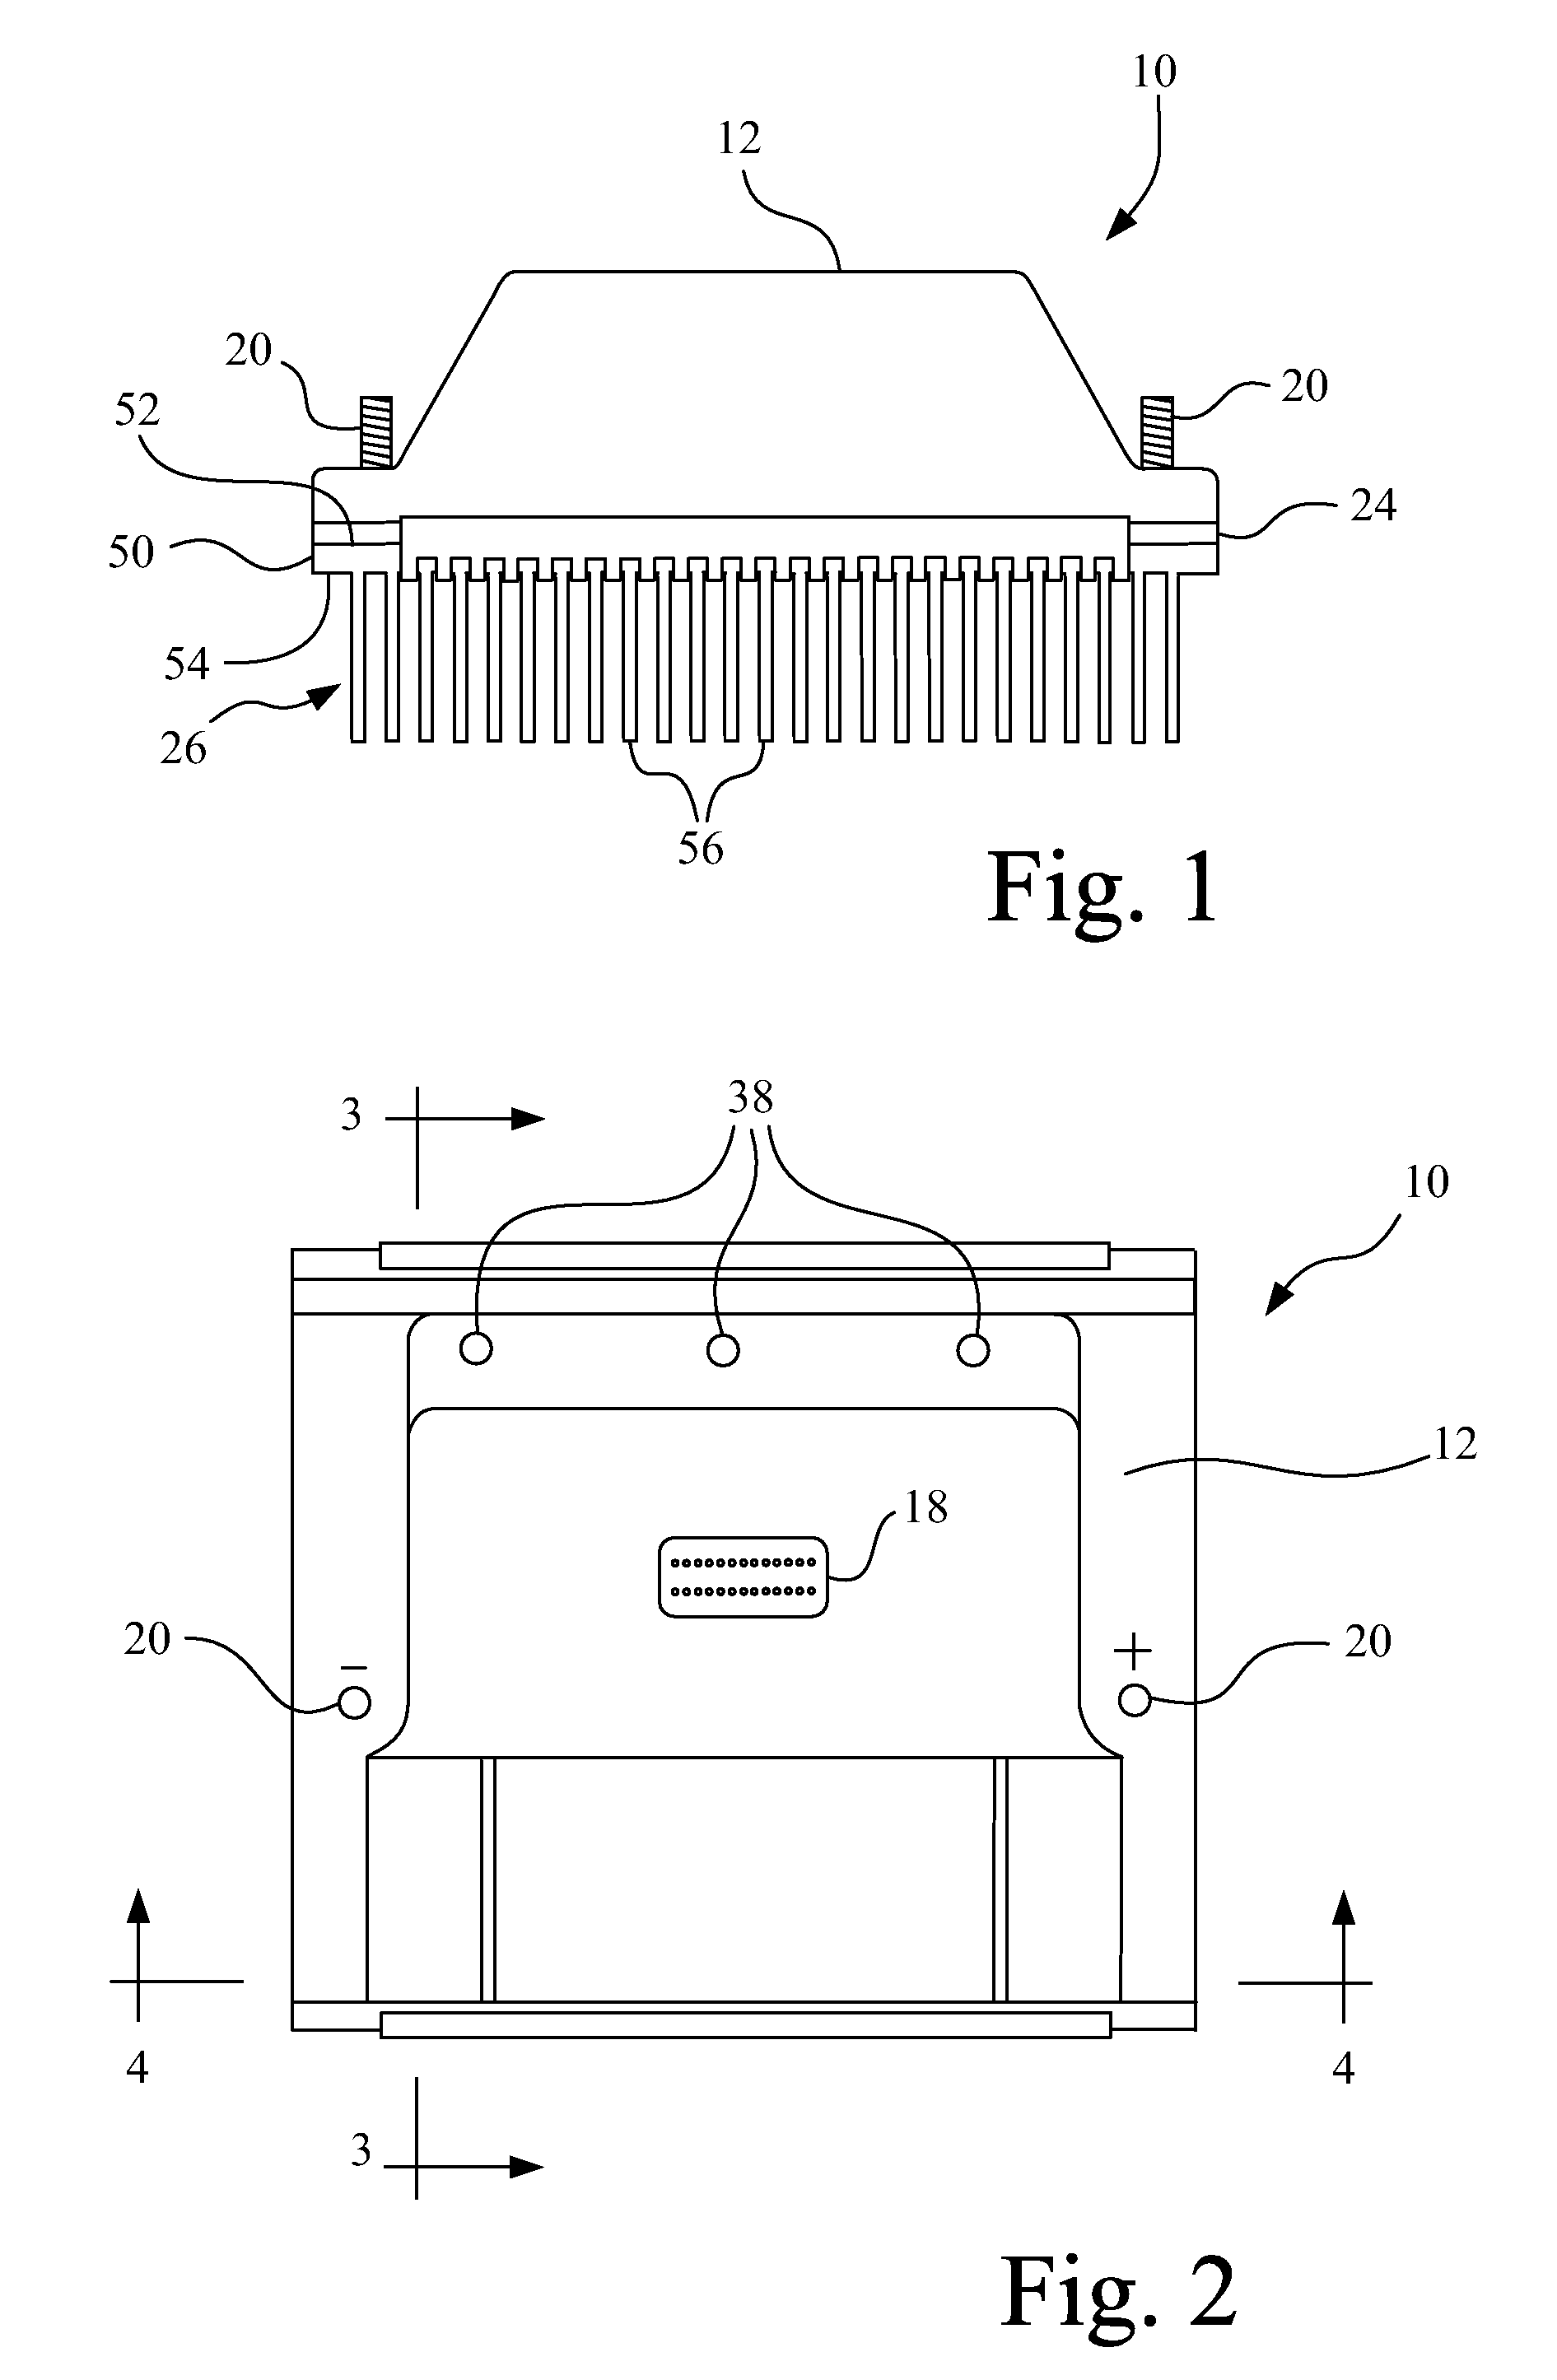 Electrical circuit assembly for high-power electronics